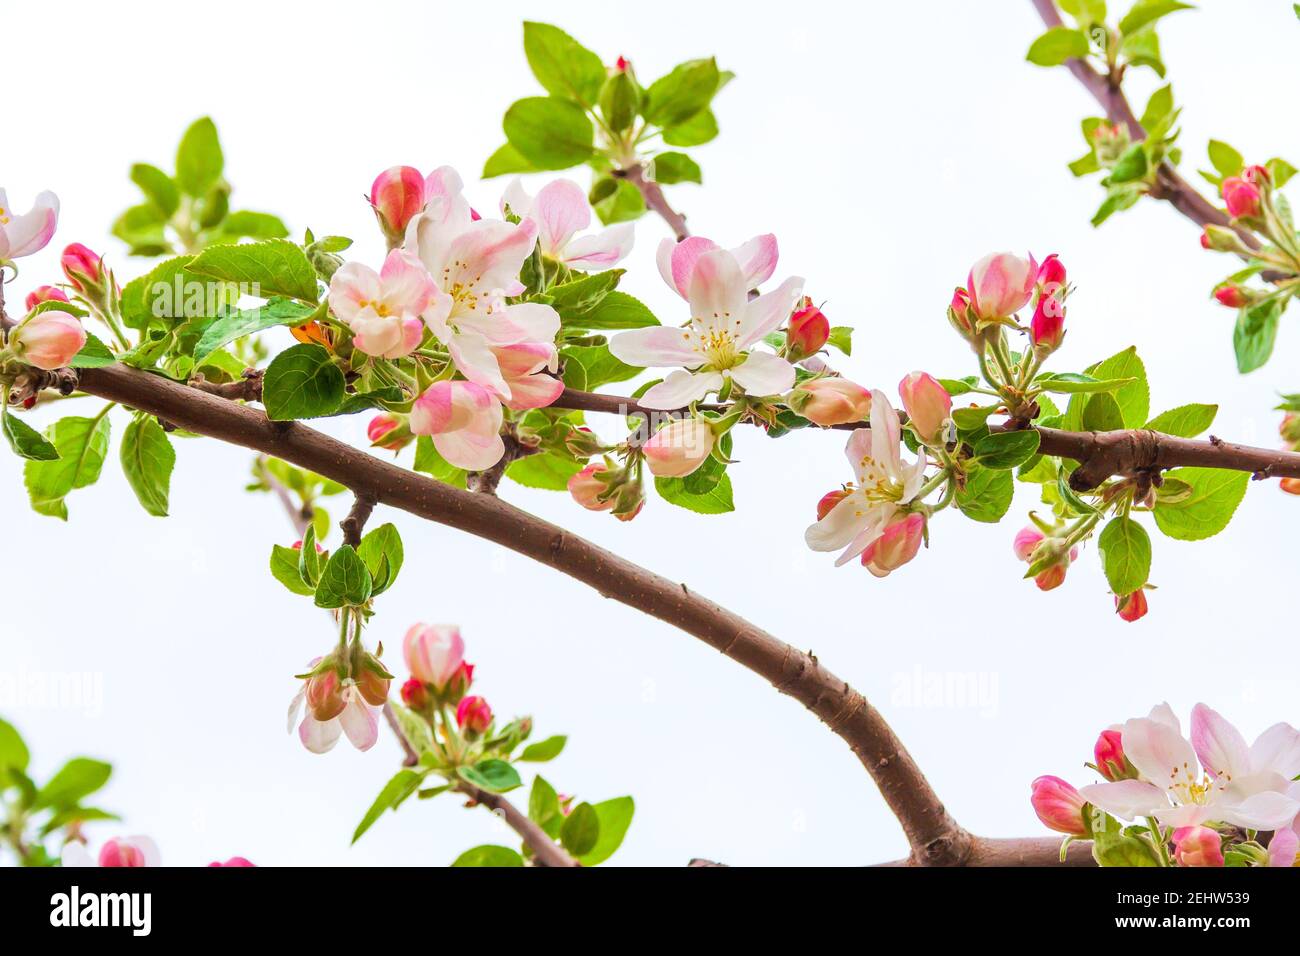 Blossoming beautiful fragile flowers and gorgeous flower buds on a separate branch of the Apple tree Stock Photo